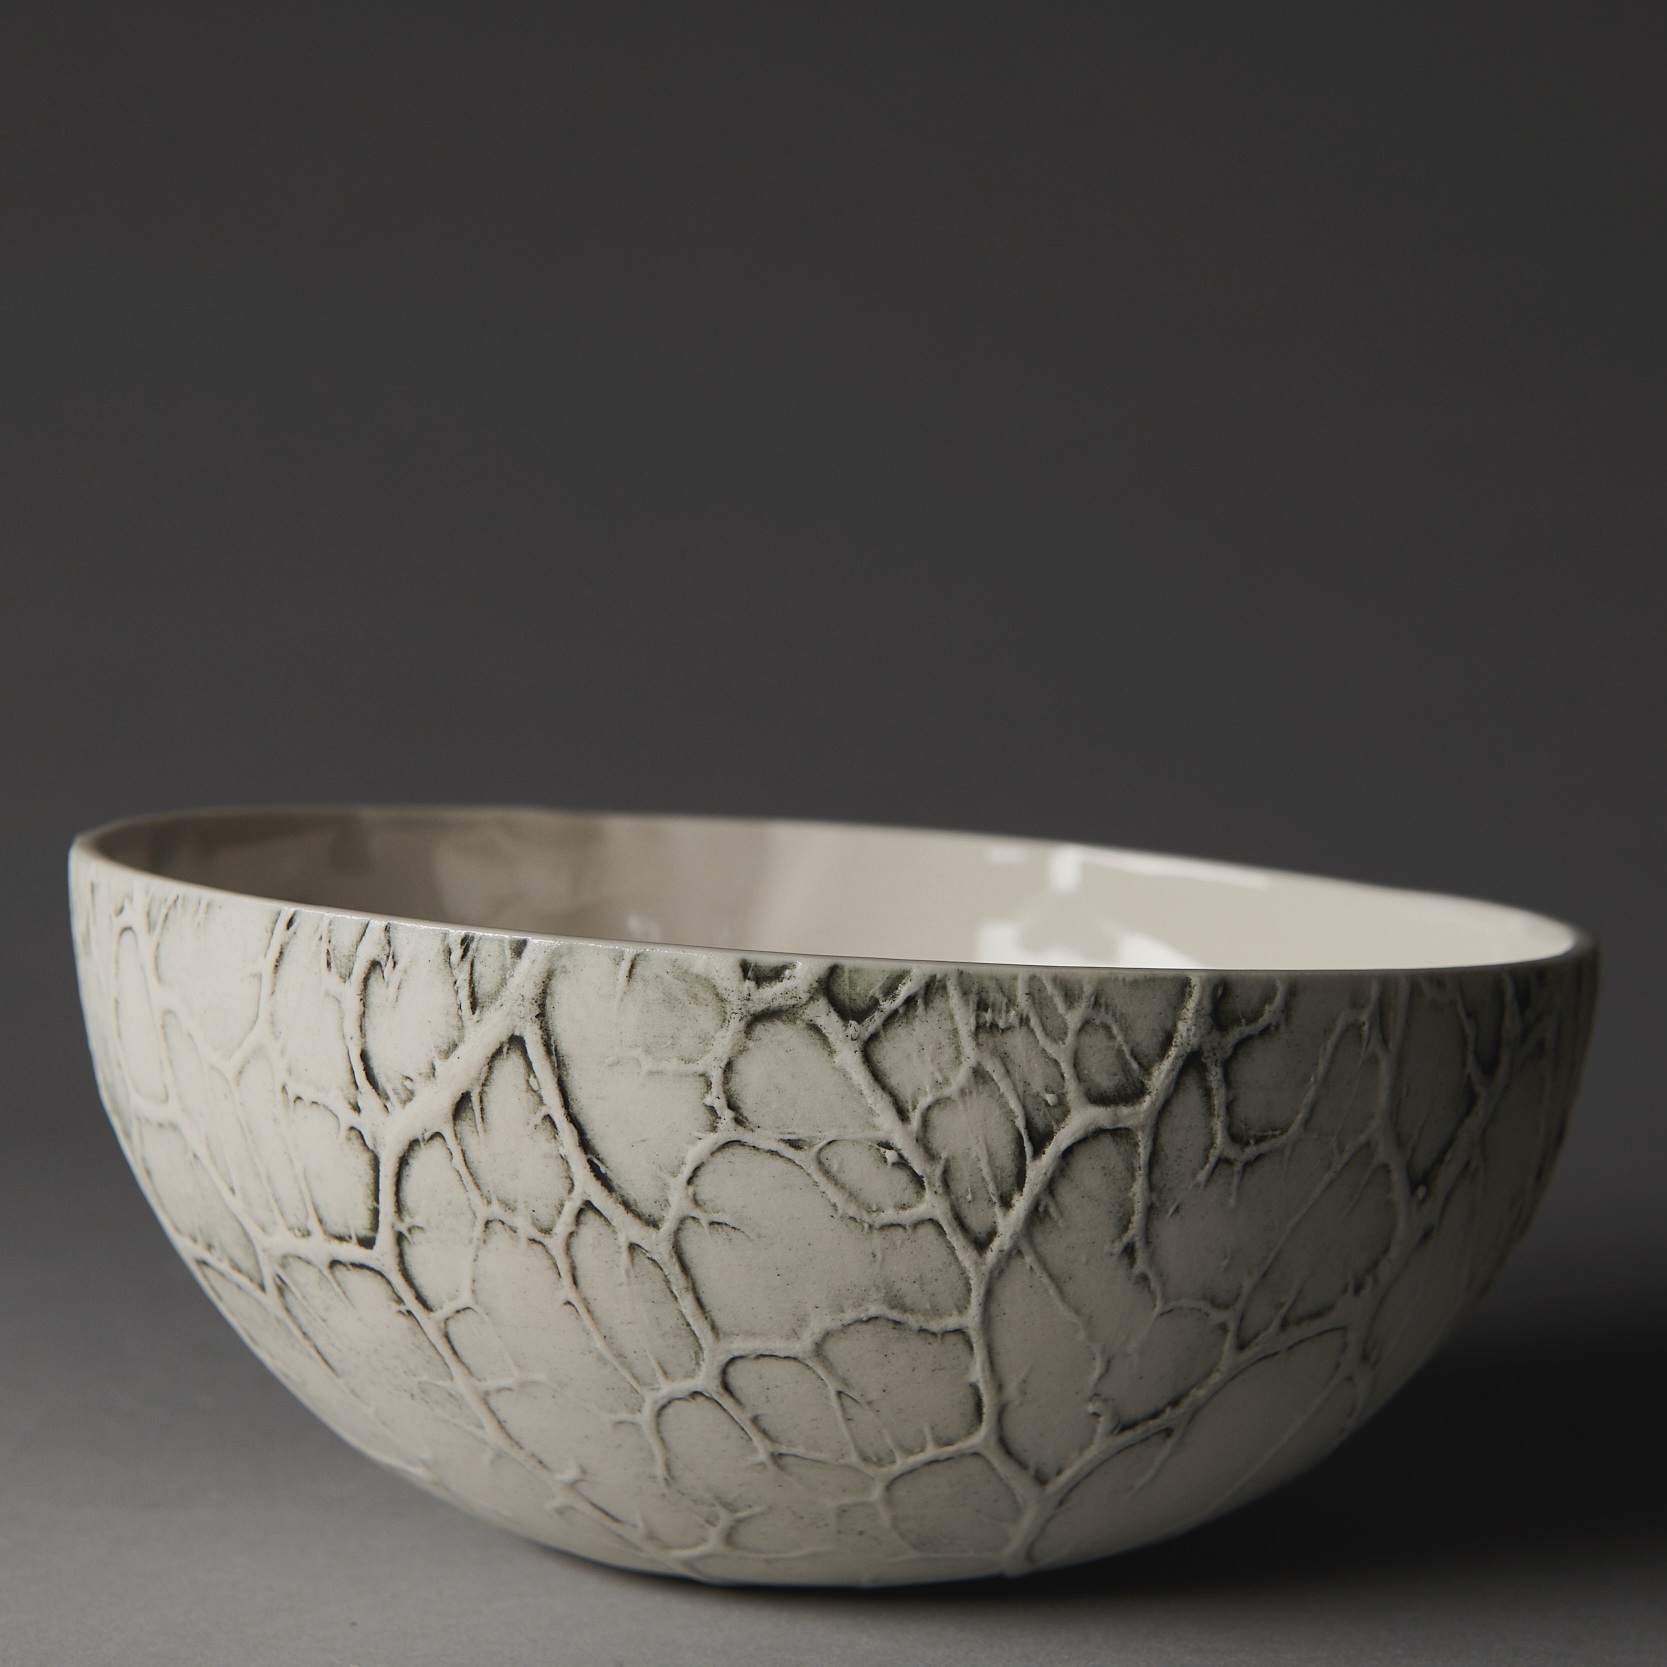 Caul bowl with black stain - version 2 - upright with a straight rim - photo by Fred Kroh